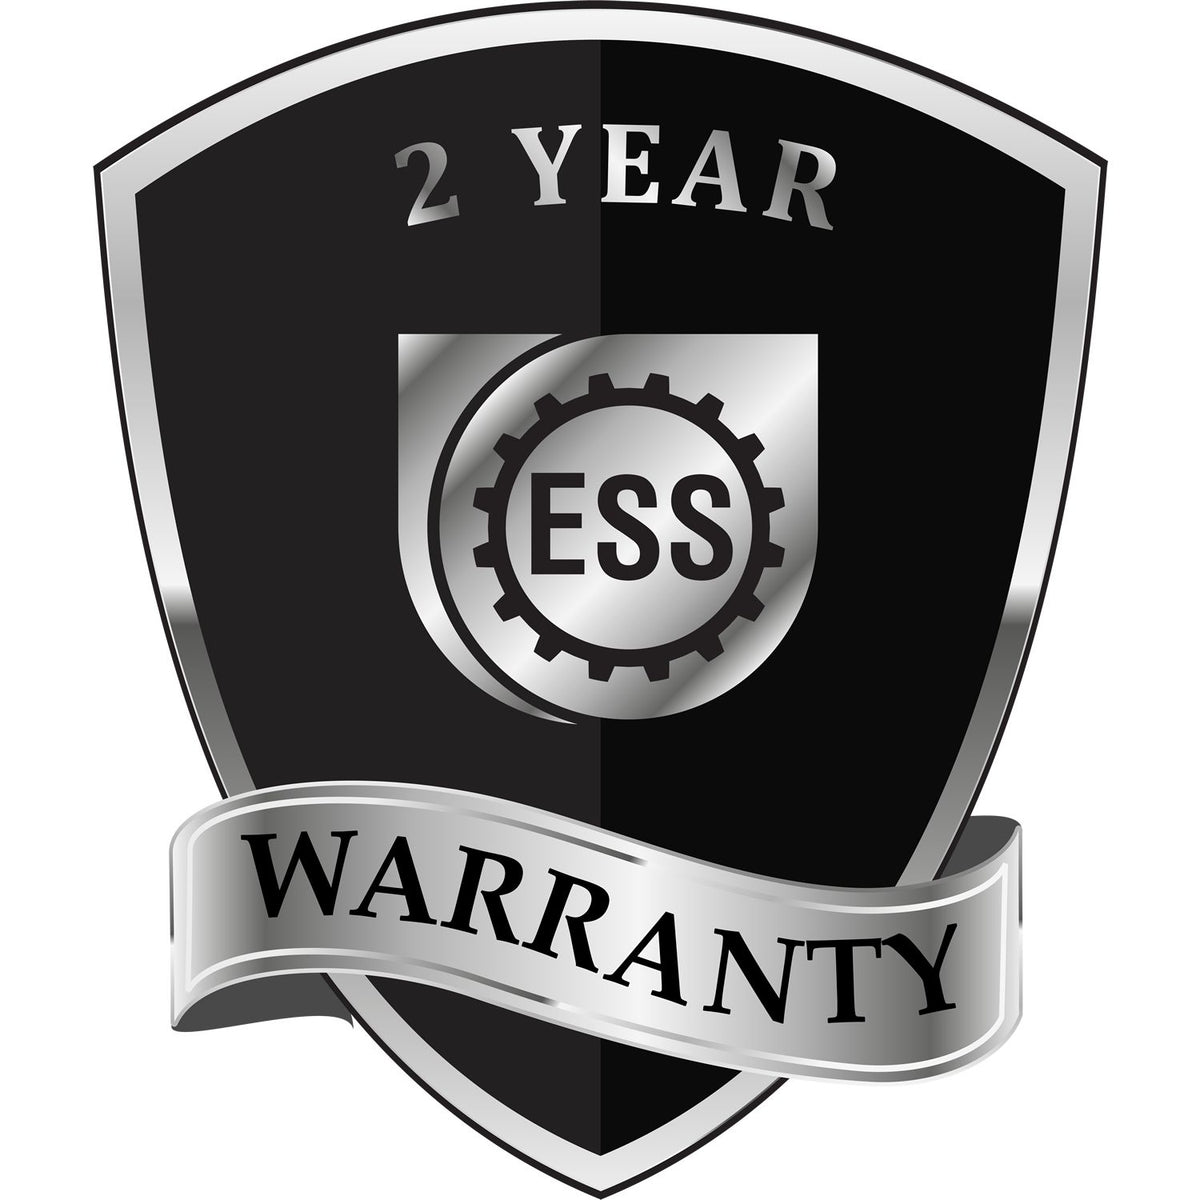 A badge or emblem showing a warranty icon for the Extended Long Reach Florida Surveyor Embosser